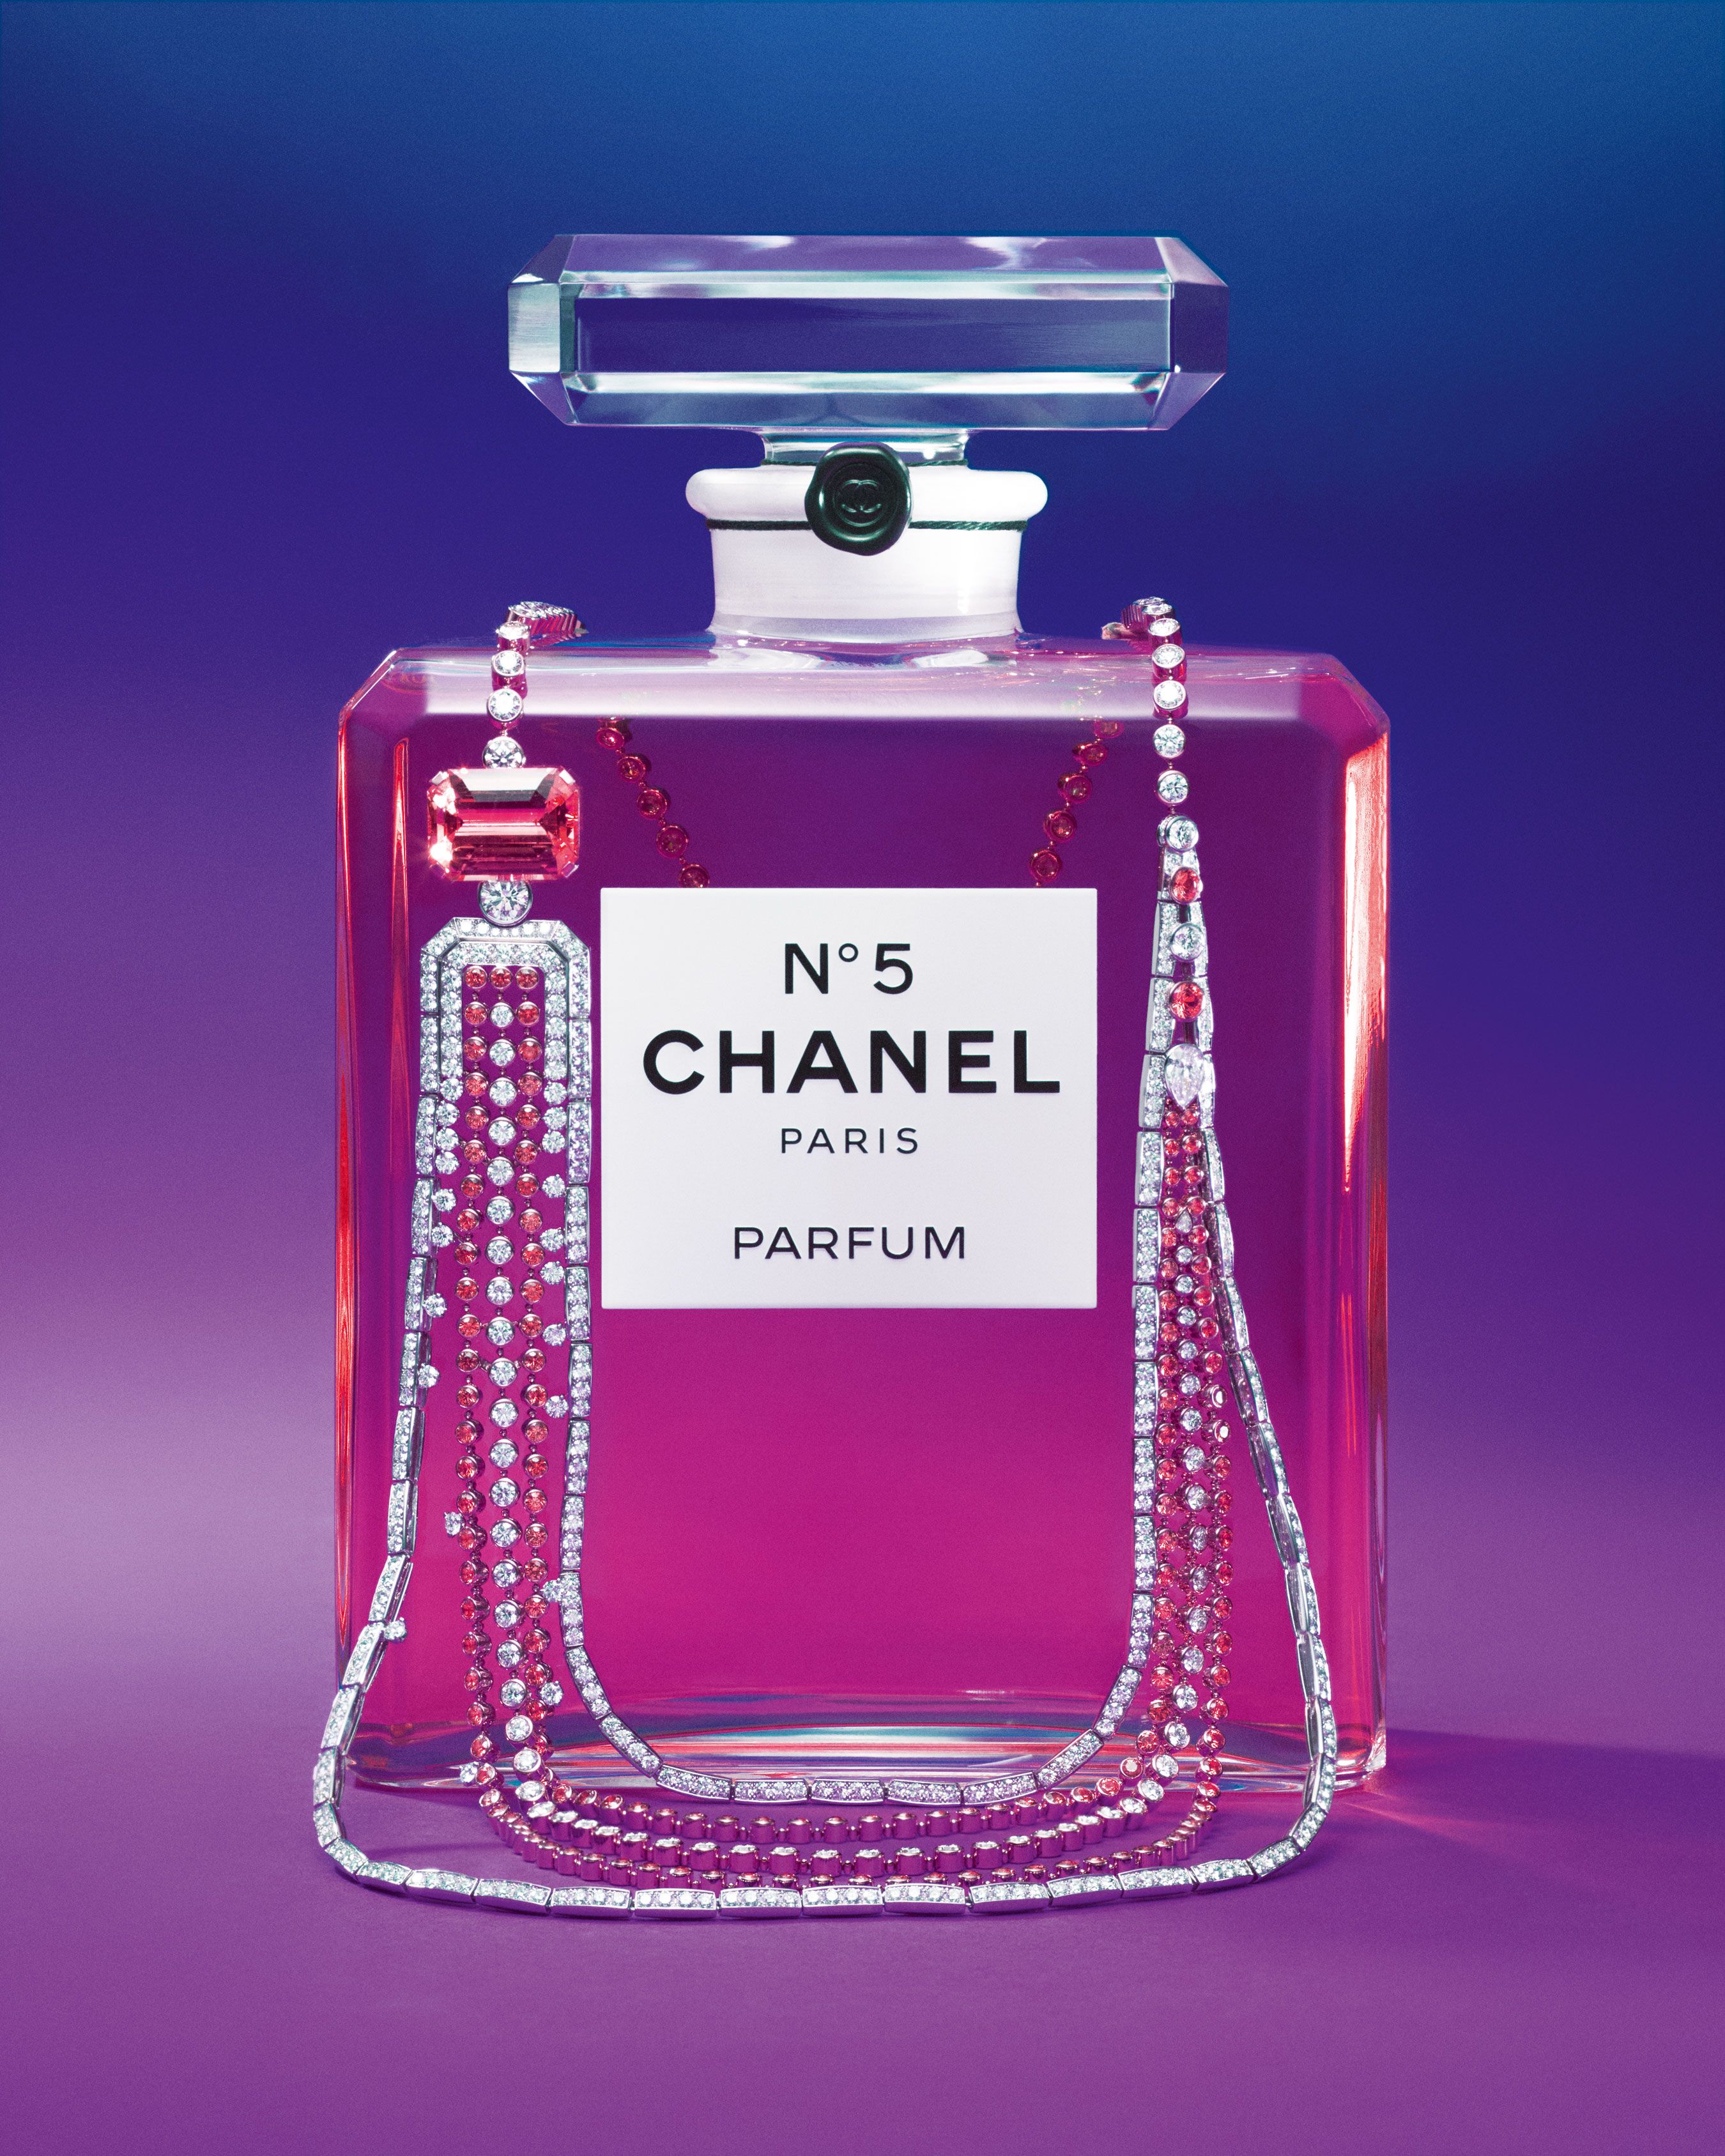 schokkend jacht microscopisch History of Chanel No. 5 - How a Legendary Perfume Stayed on Top